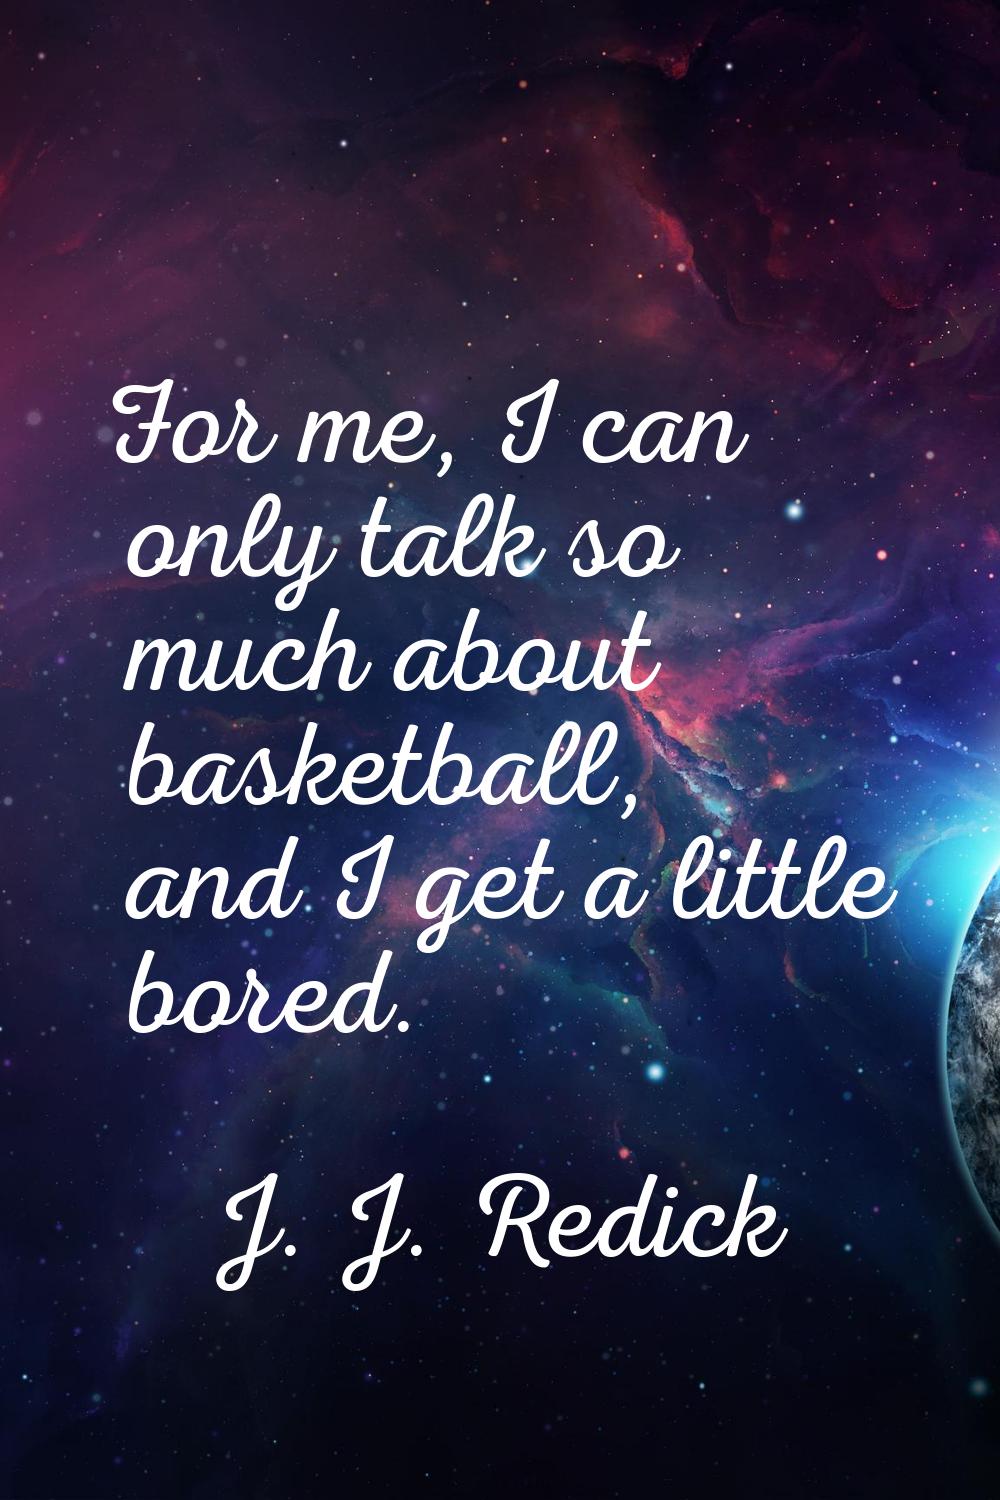 For me, I can only talk so much about basketball, and I get a little bored.